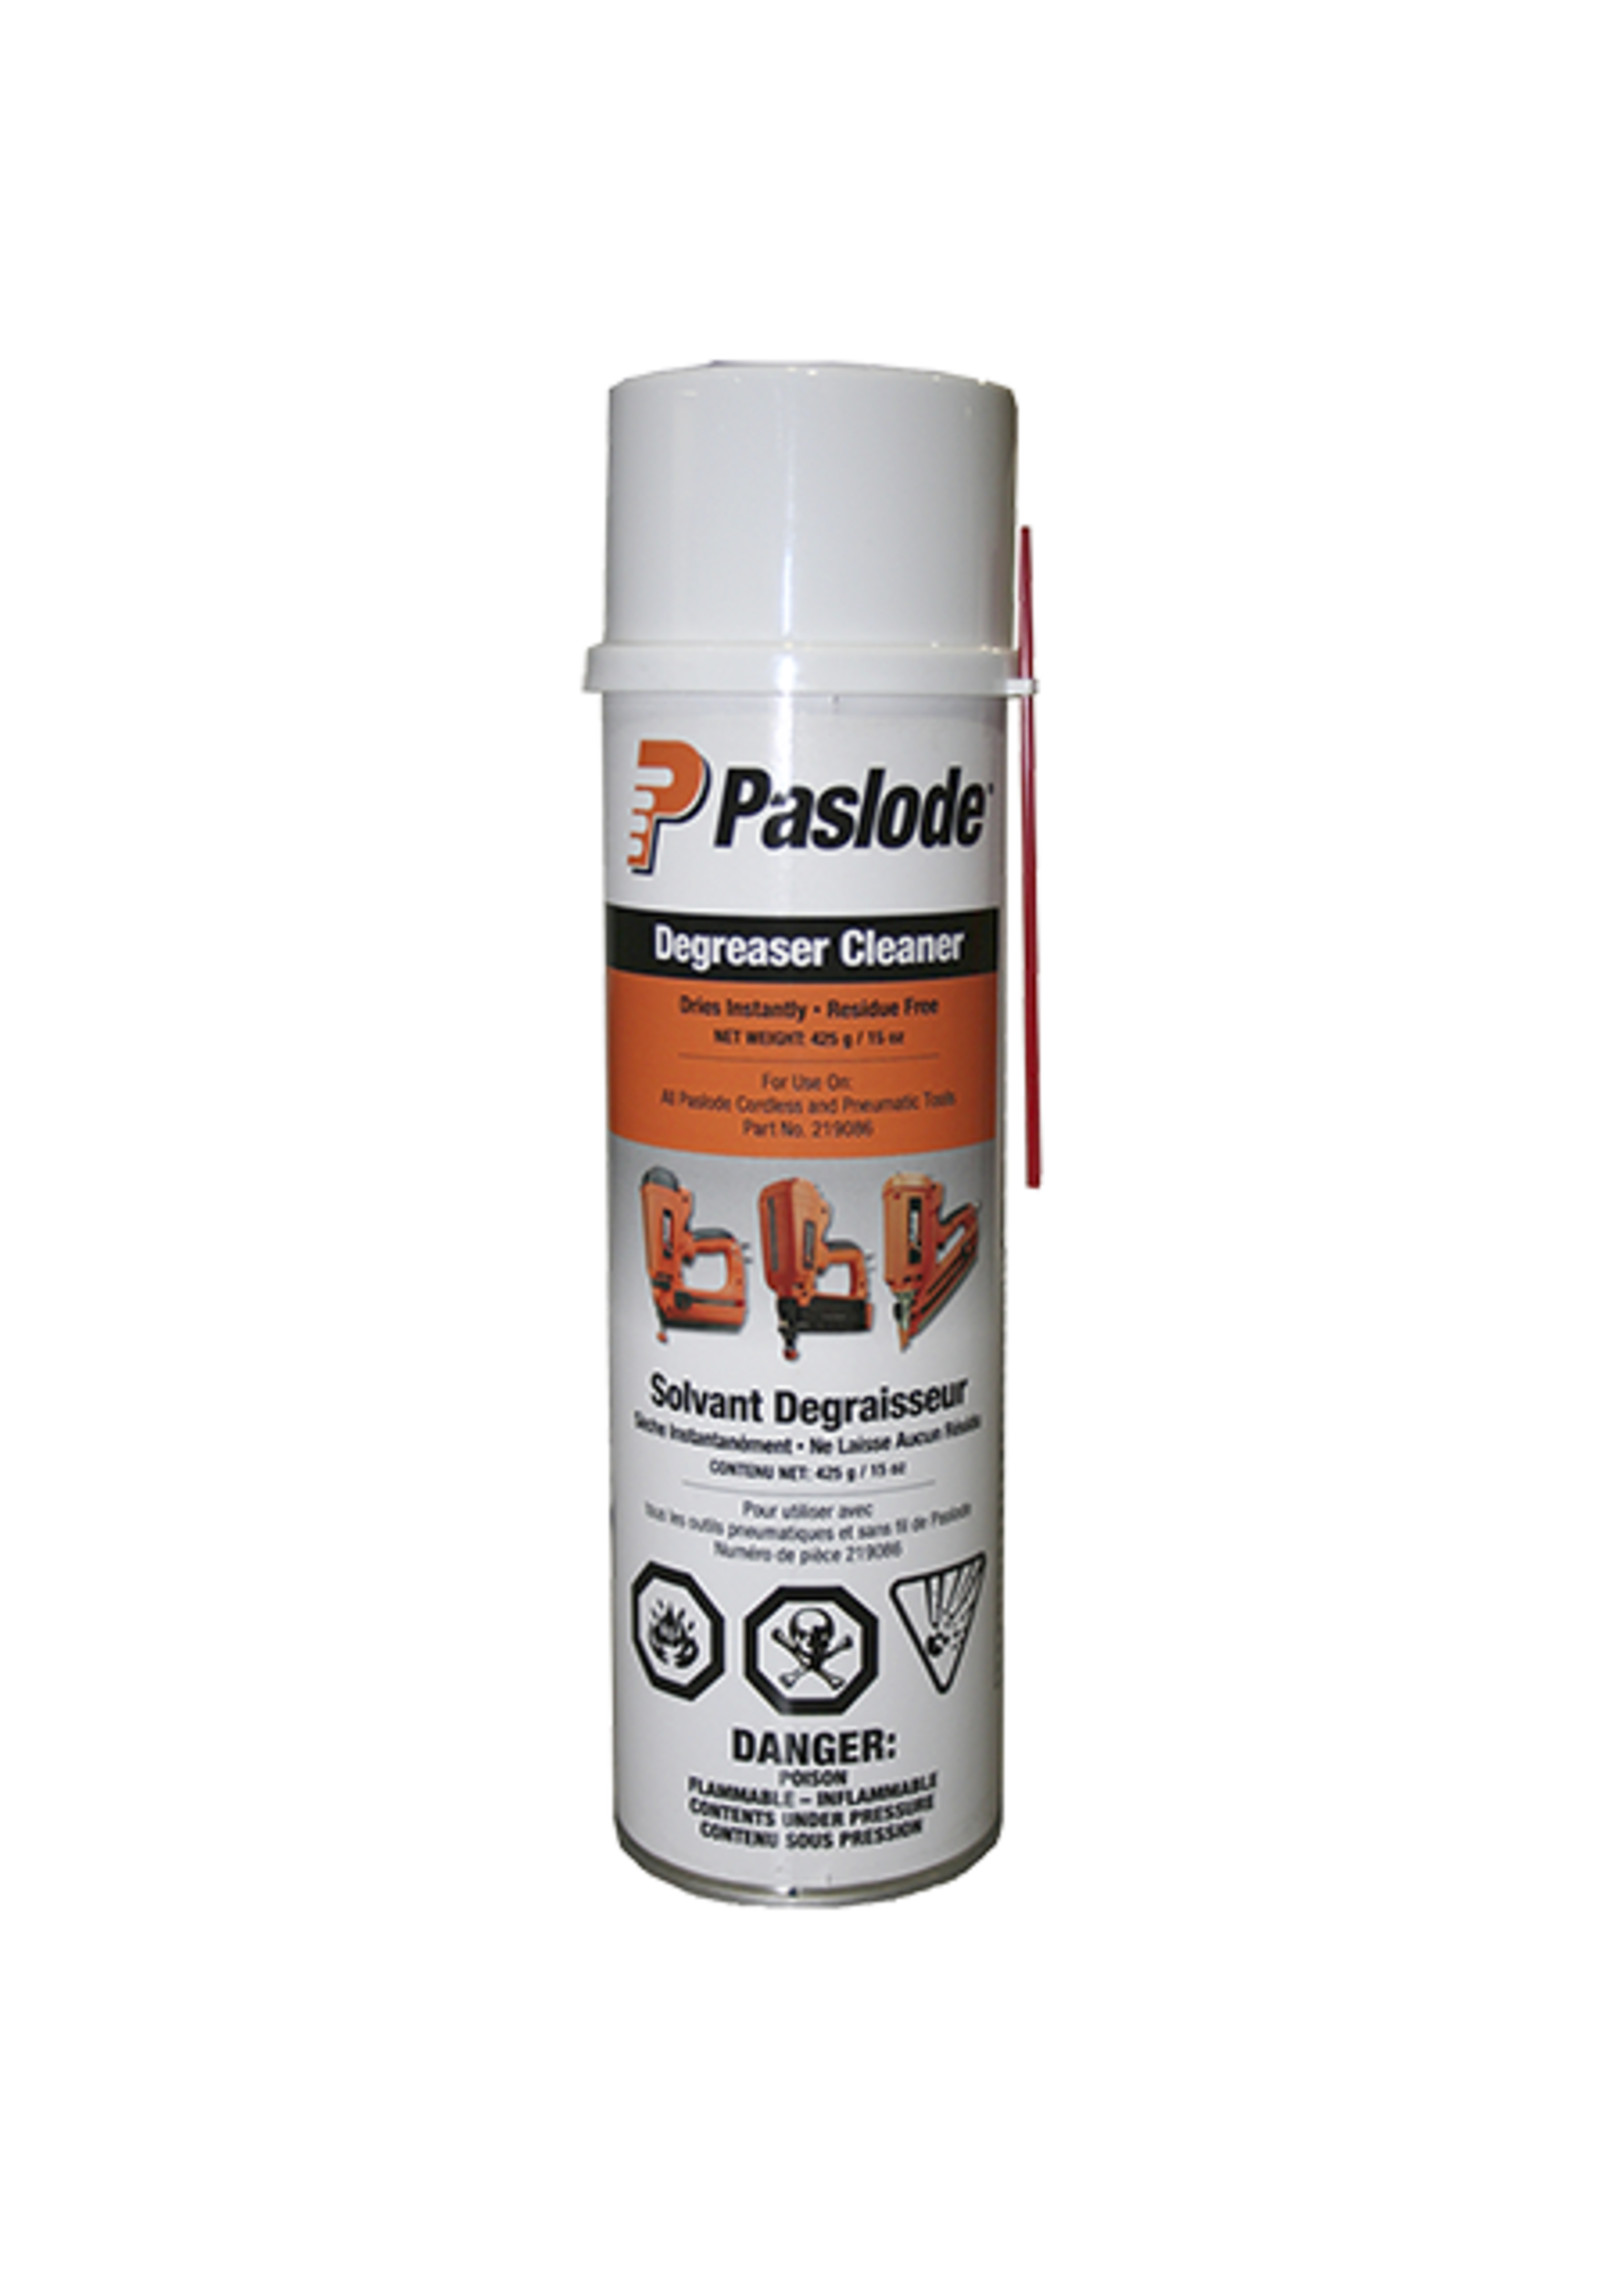 FenceFast Paslode Degreaser Cleaner Impluse